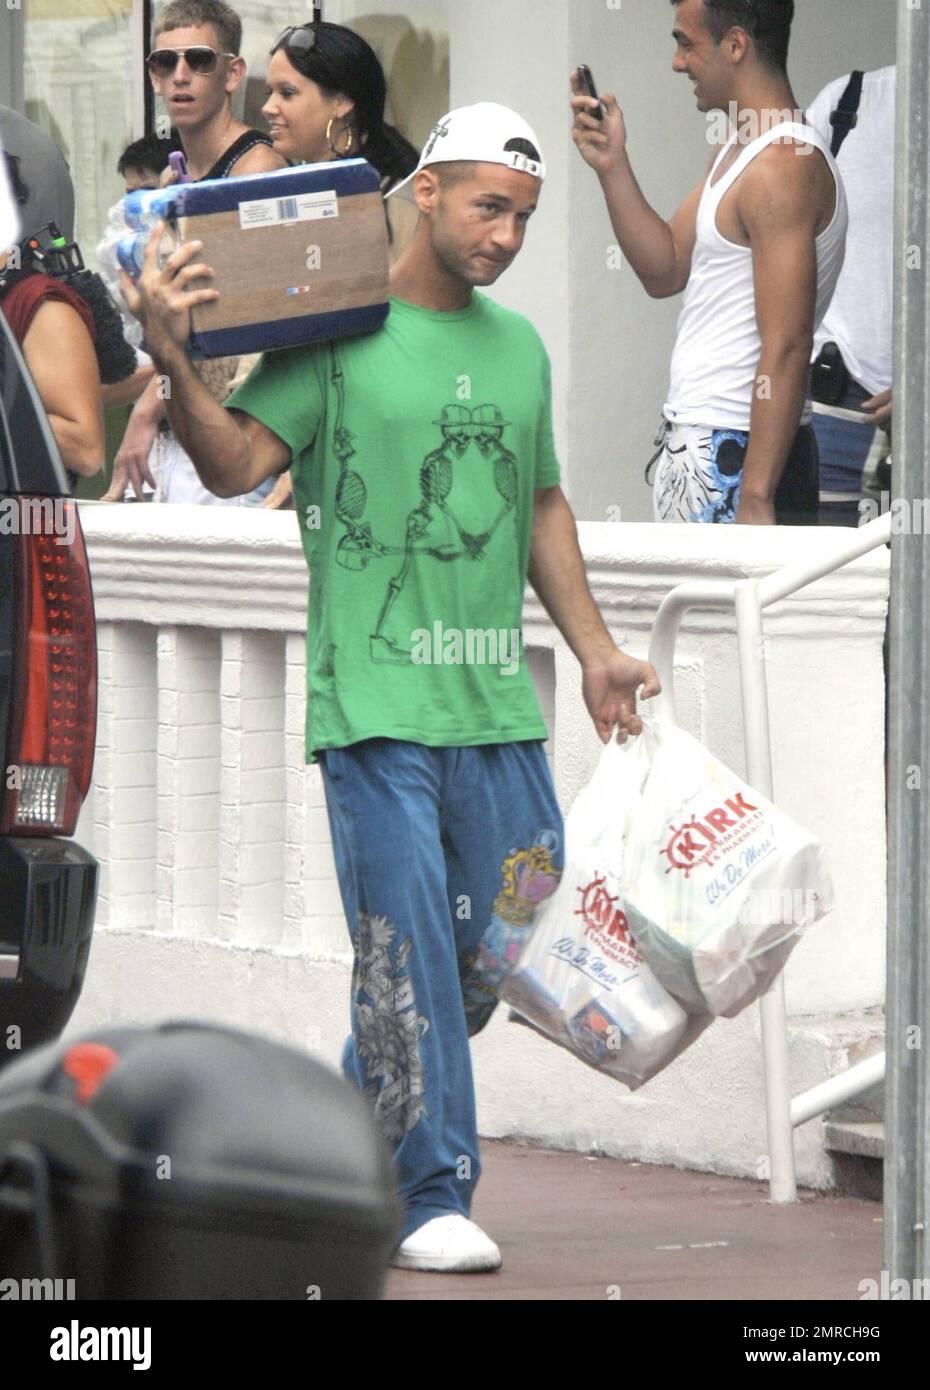 EXCLUSIVE!! 'Jersey Shore's' Mike 'The Situation' Sorrentino and DJ Pauly D carry some groceries into their temporary home after a major grocery shopping trip. Miami Beach, FL. 4/11/10.    . Stock Photo